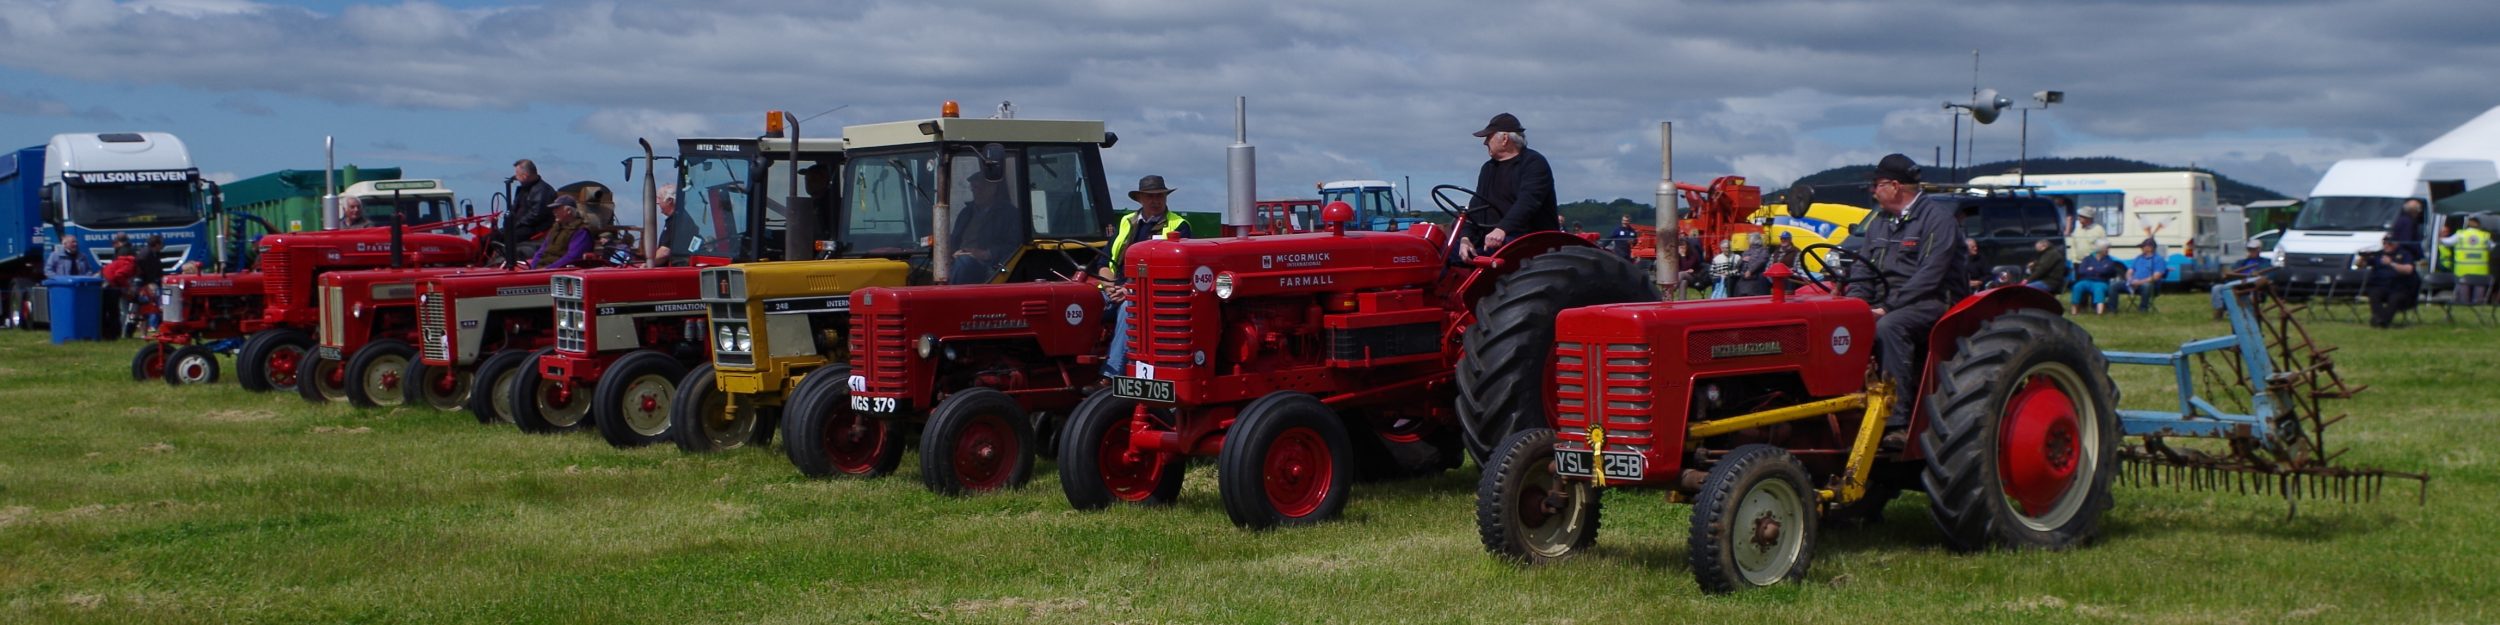 Fife Vintage Agricultural Machinery Club